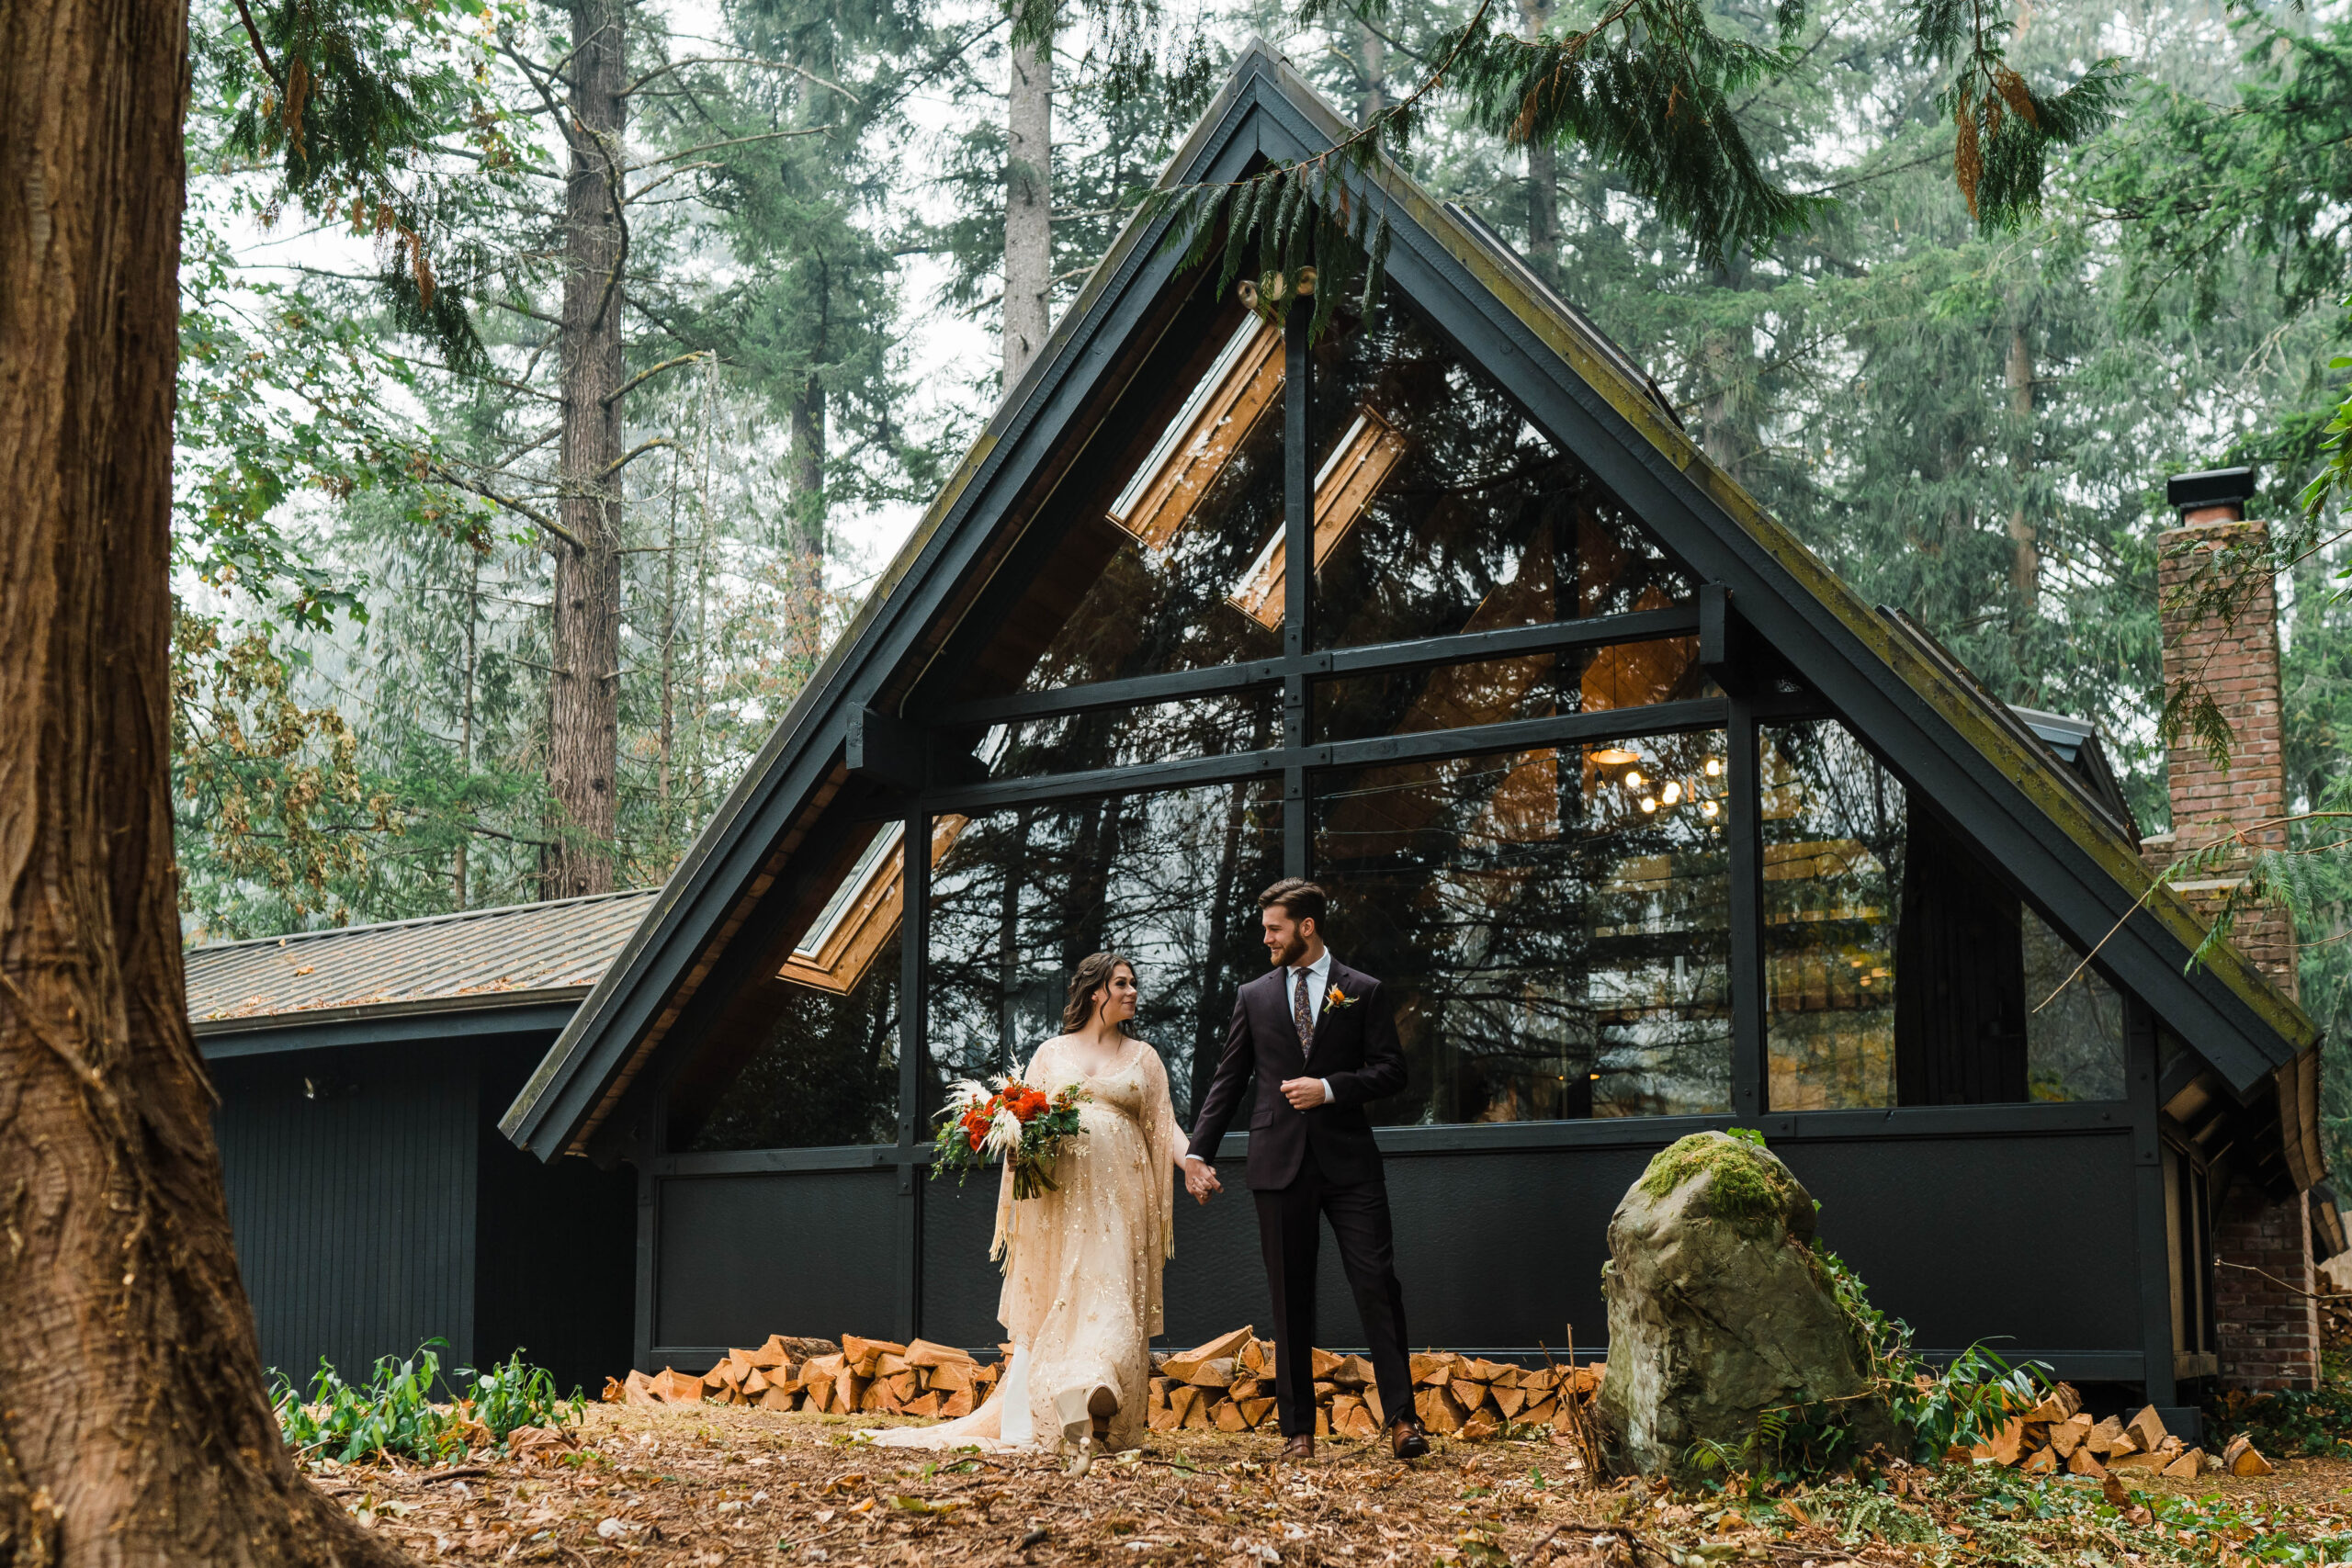 How to Plan an AirBnb Wedding - Between the Pine